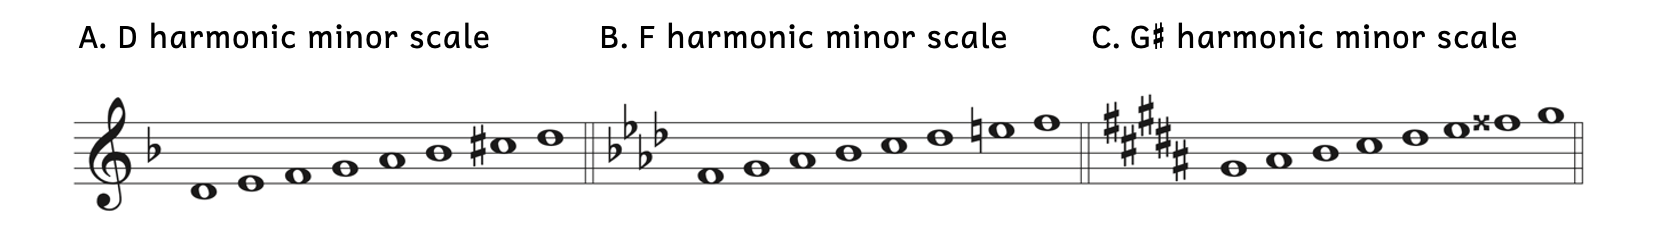 Examples A, B, and C show the ascending harmonic minor scales with key signatures. Example A is a D harmonic minor scale. Its key signature has 1 flat and C is raised to C-sharp. Example B is an F harmonic minor scale. Its key signature has 4 flats and E-flat is raised to E-natural. Example C is a G-sharp harmonic minor scale. Its key signature has 5 sharps and F-sharp is raised to F-double sharp